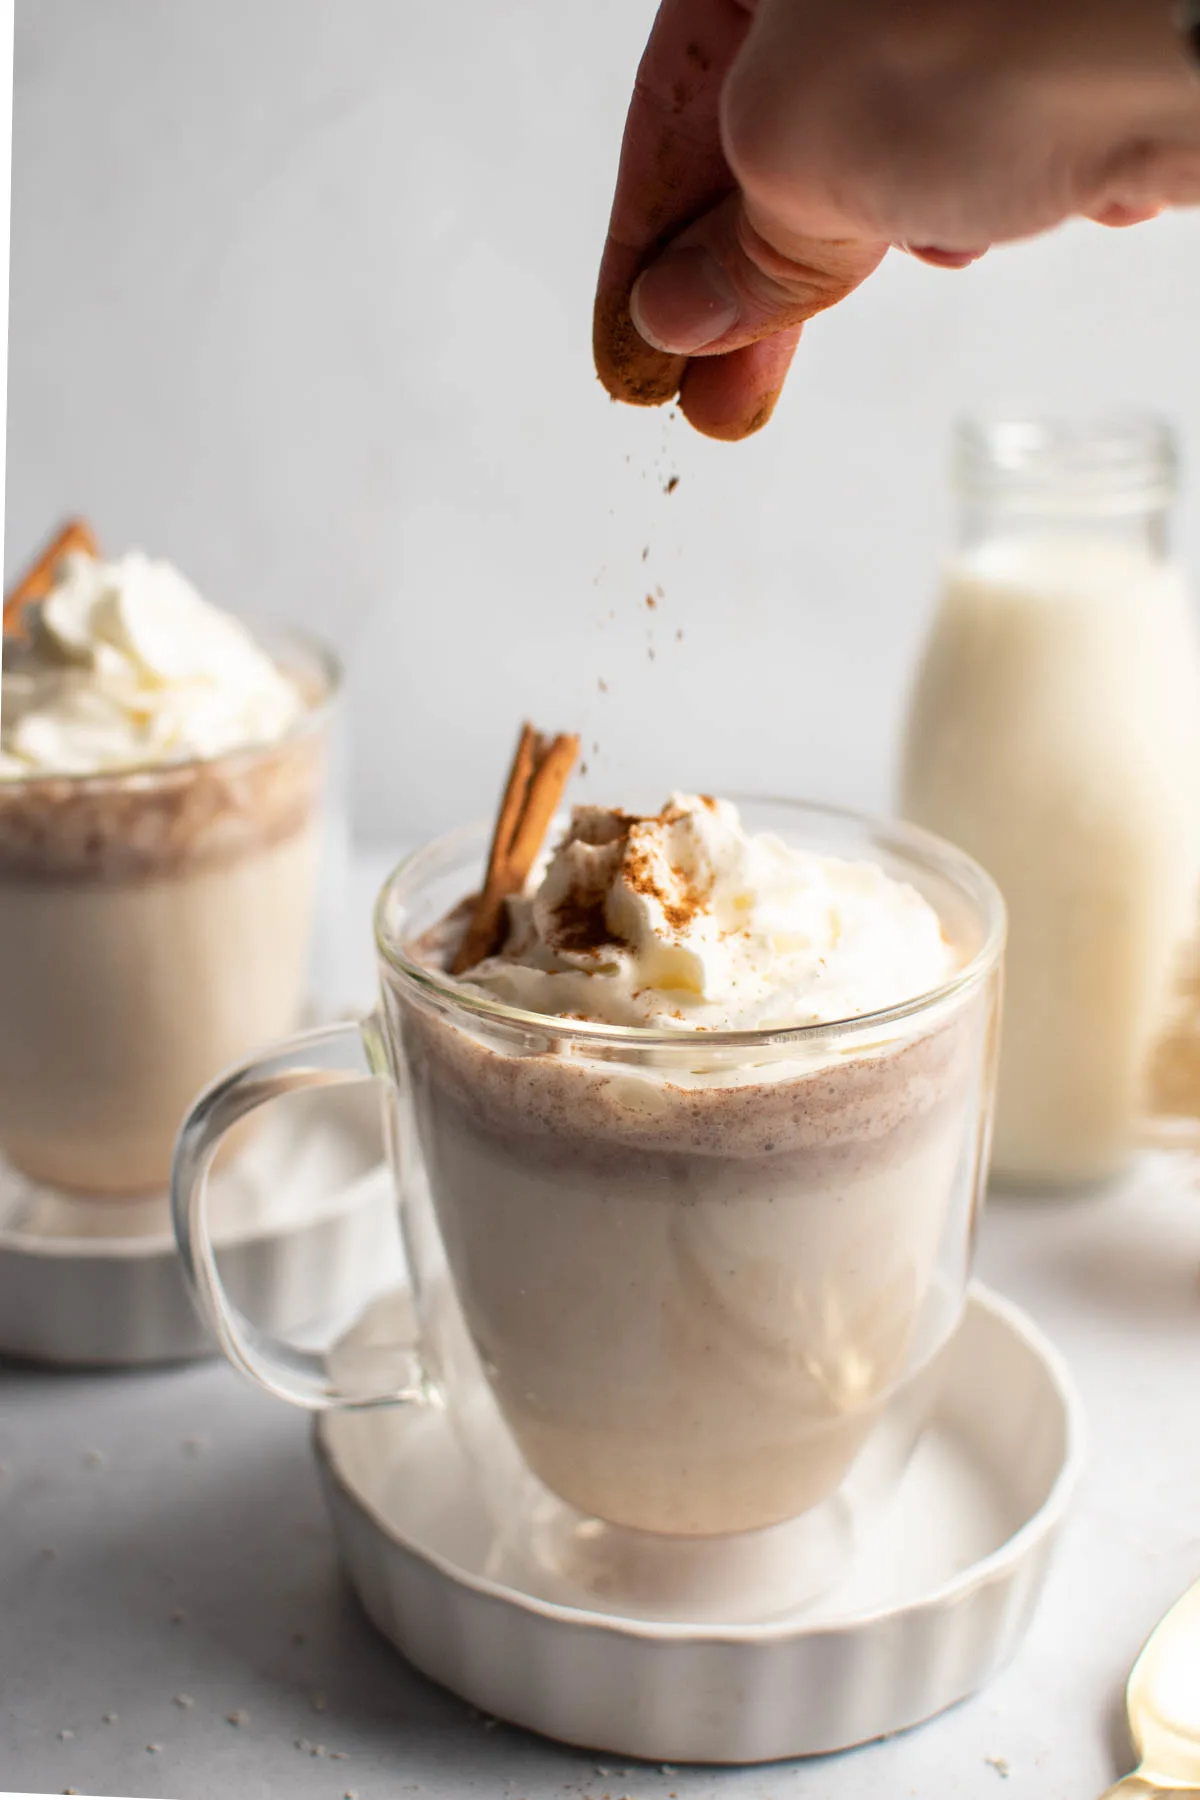 Hand sprinkles cinnamon on mug of white chocolate hot cocoa with whipped cream and cinnamon stick.